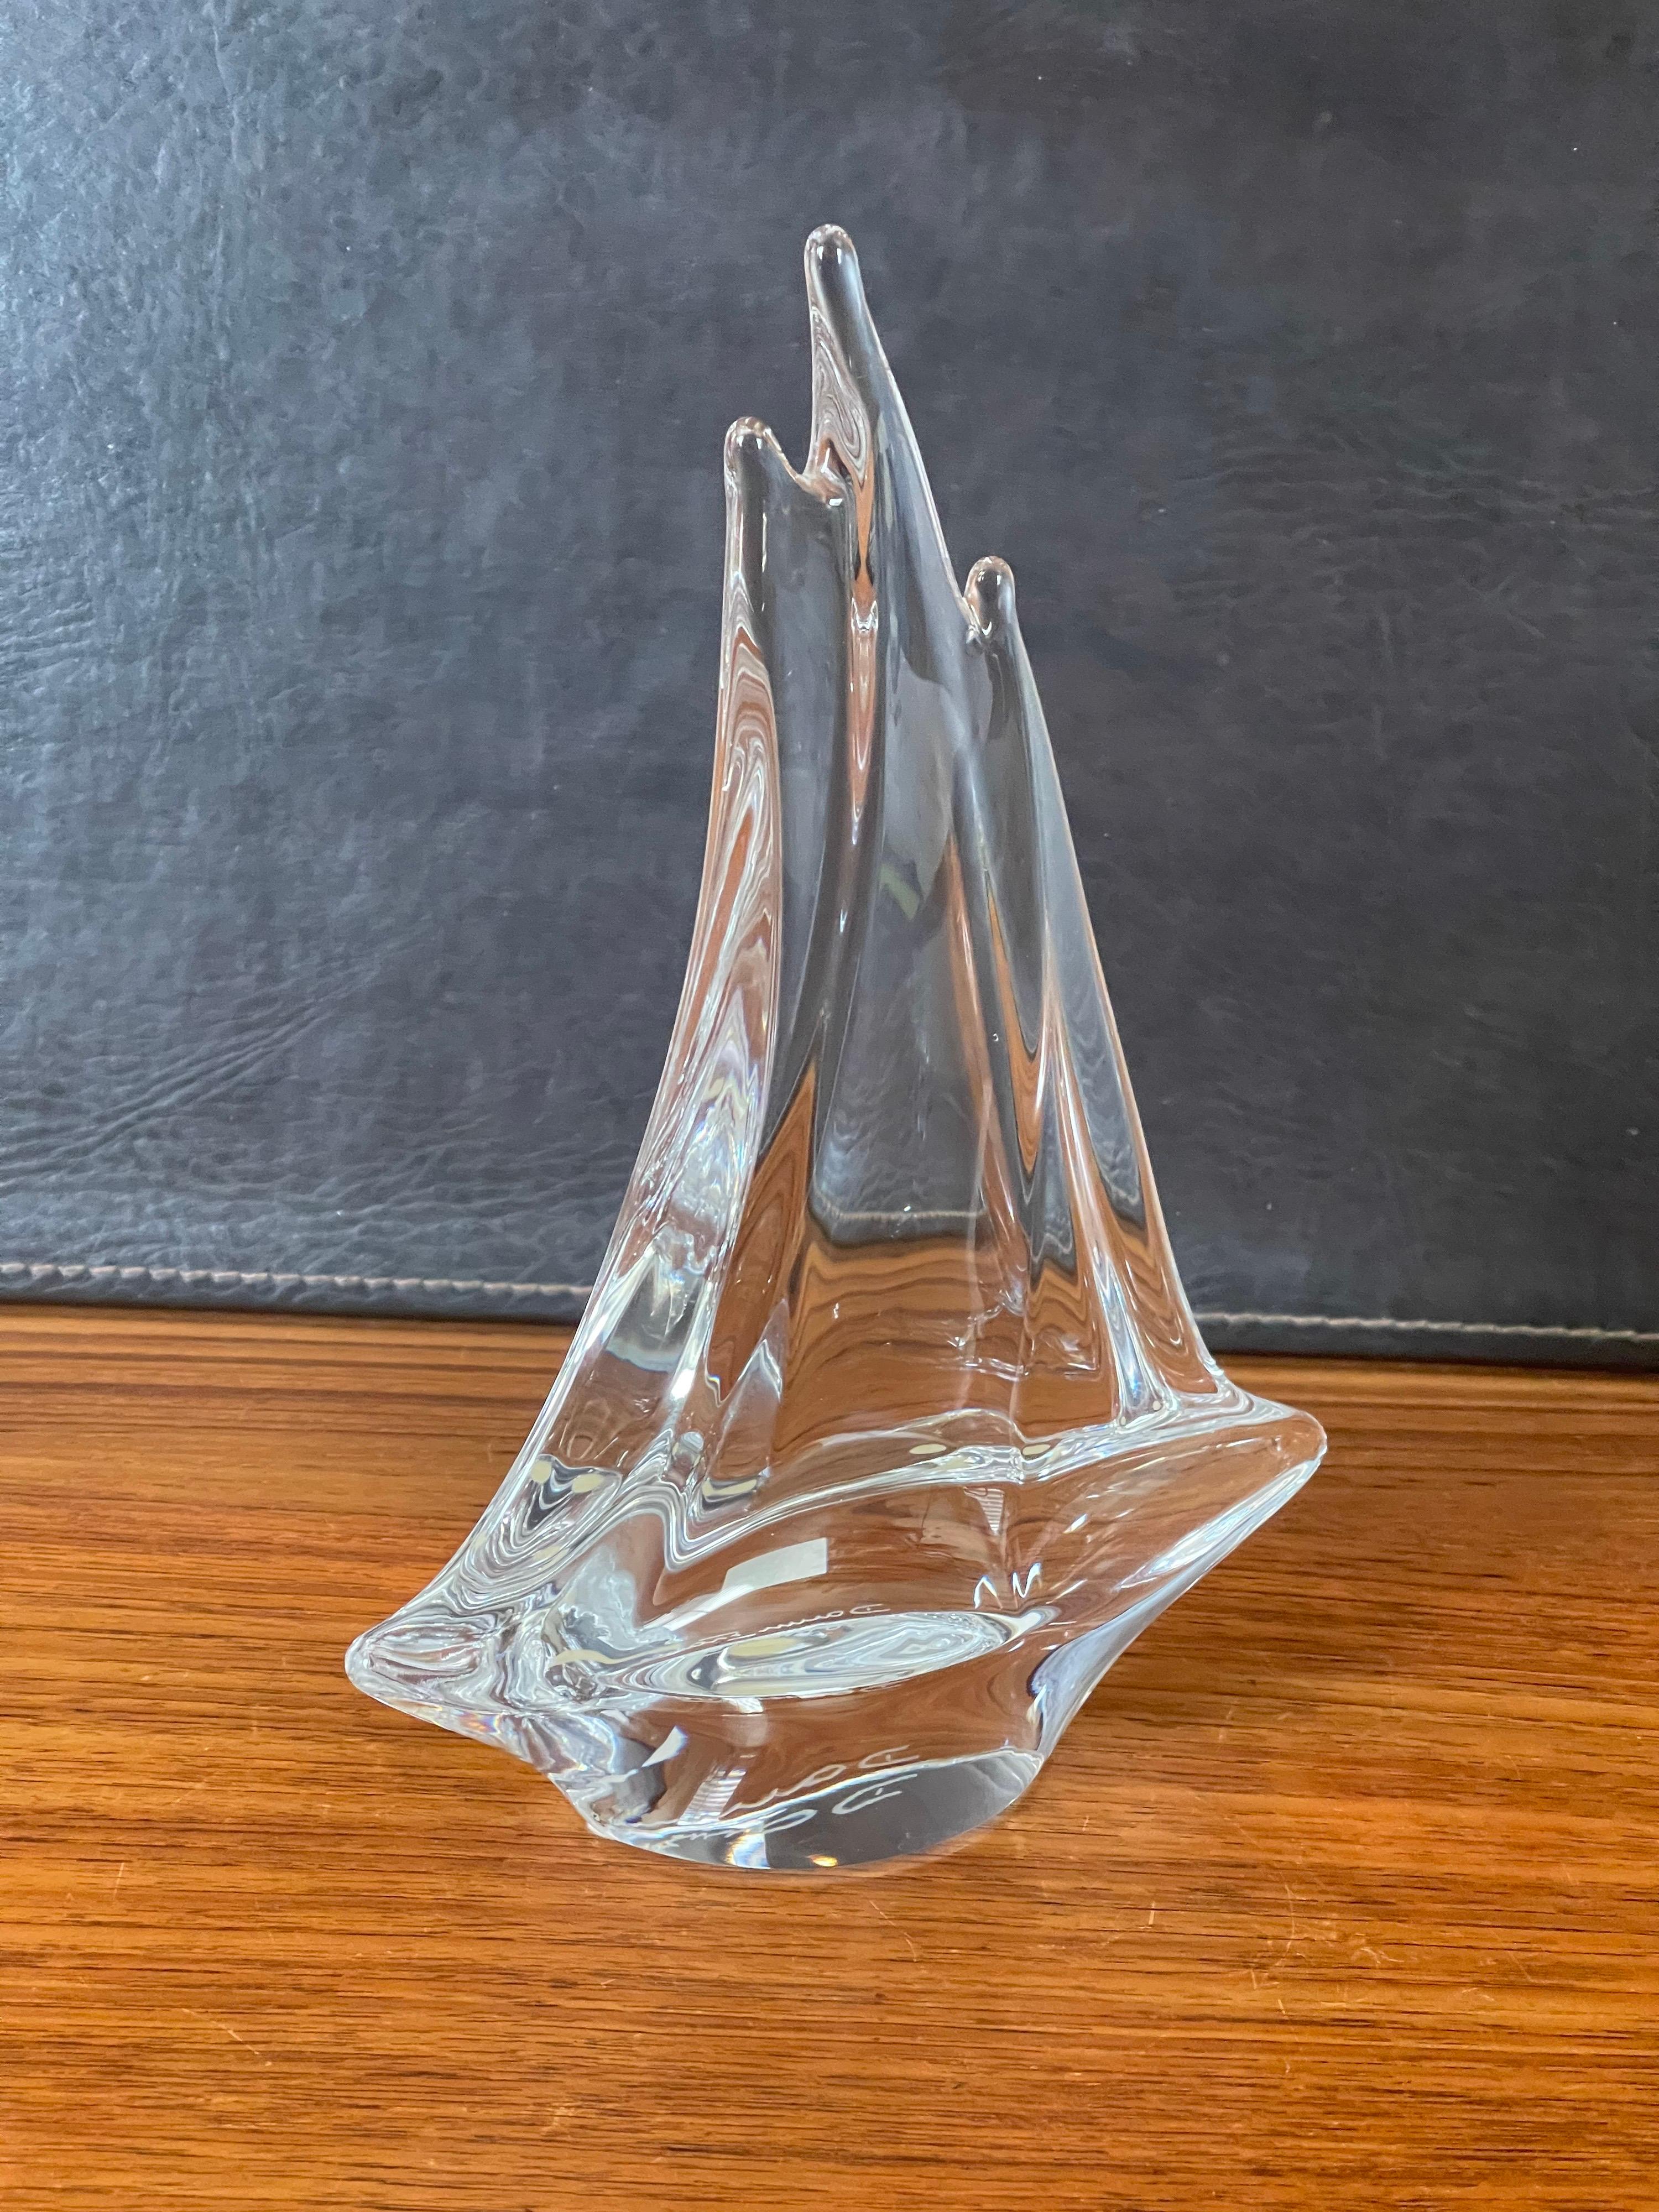 Contemporary Crystal Sailboat Sculpture by Daum France